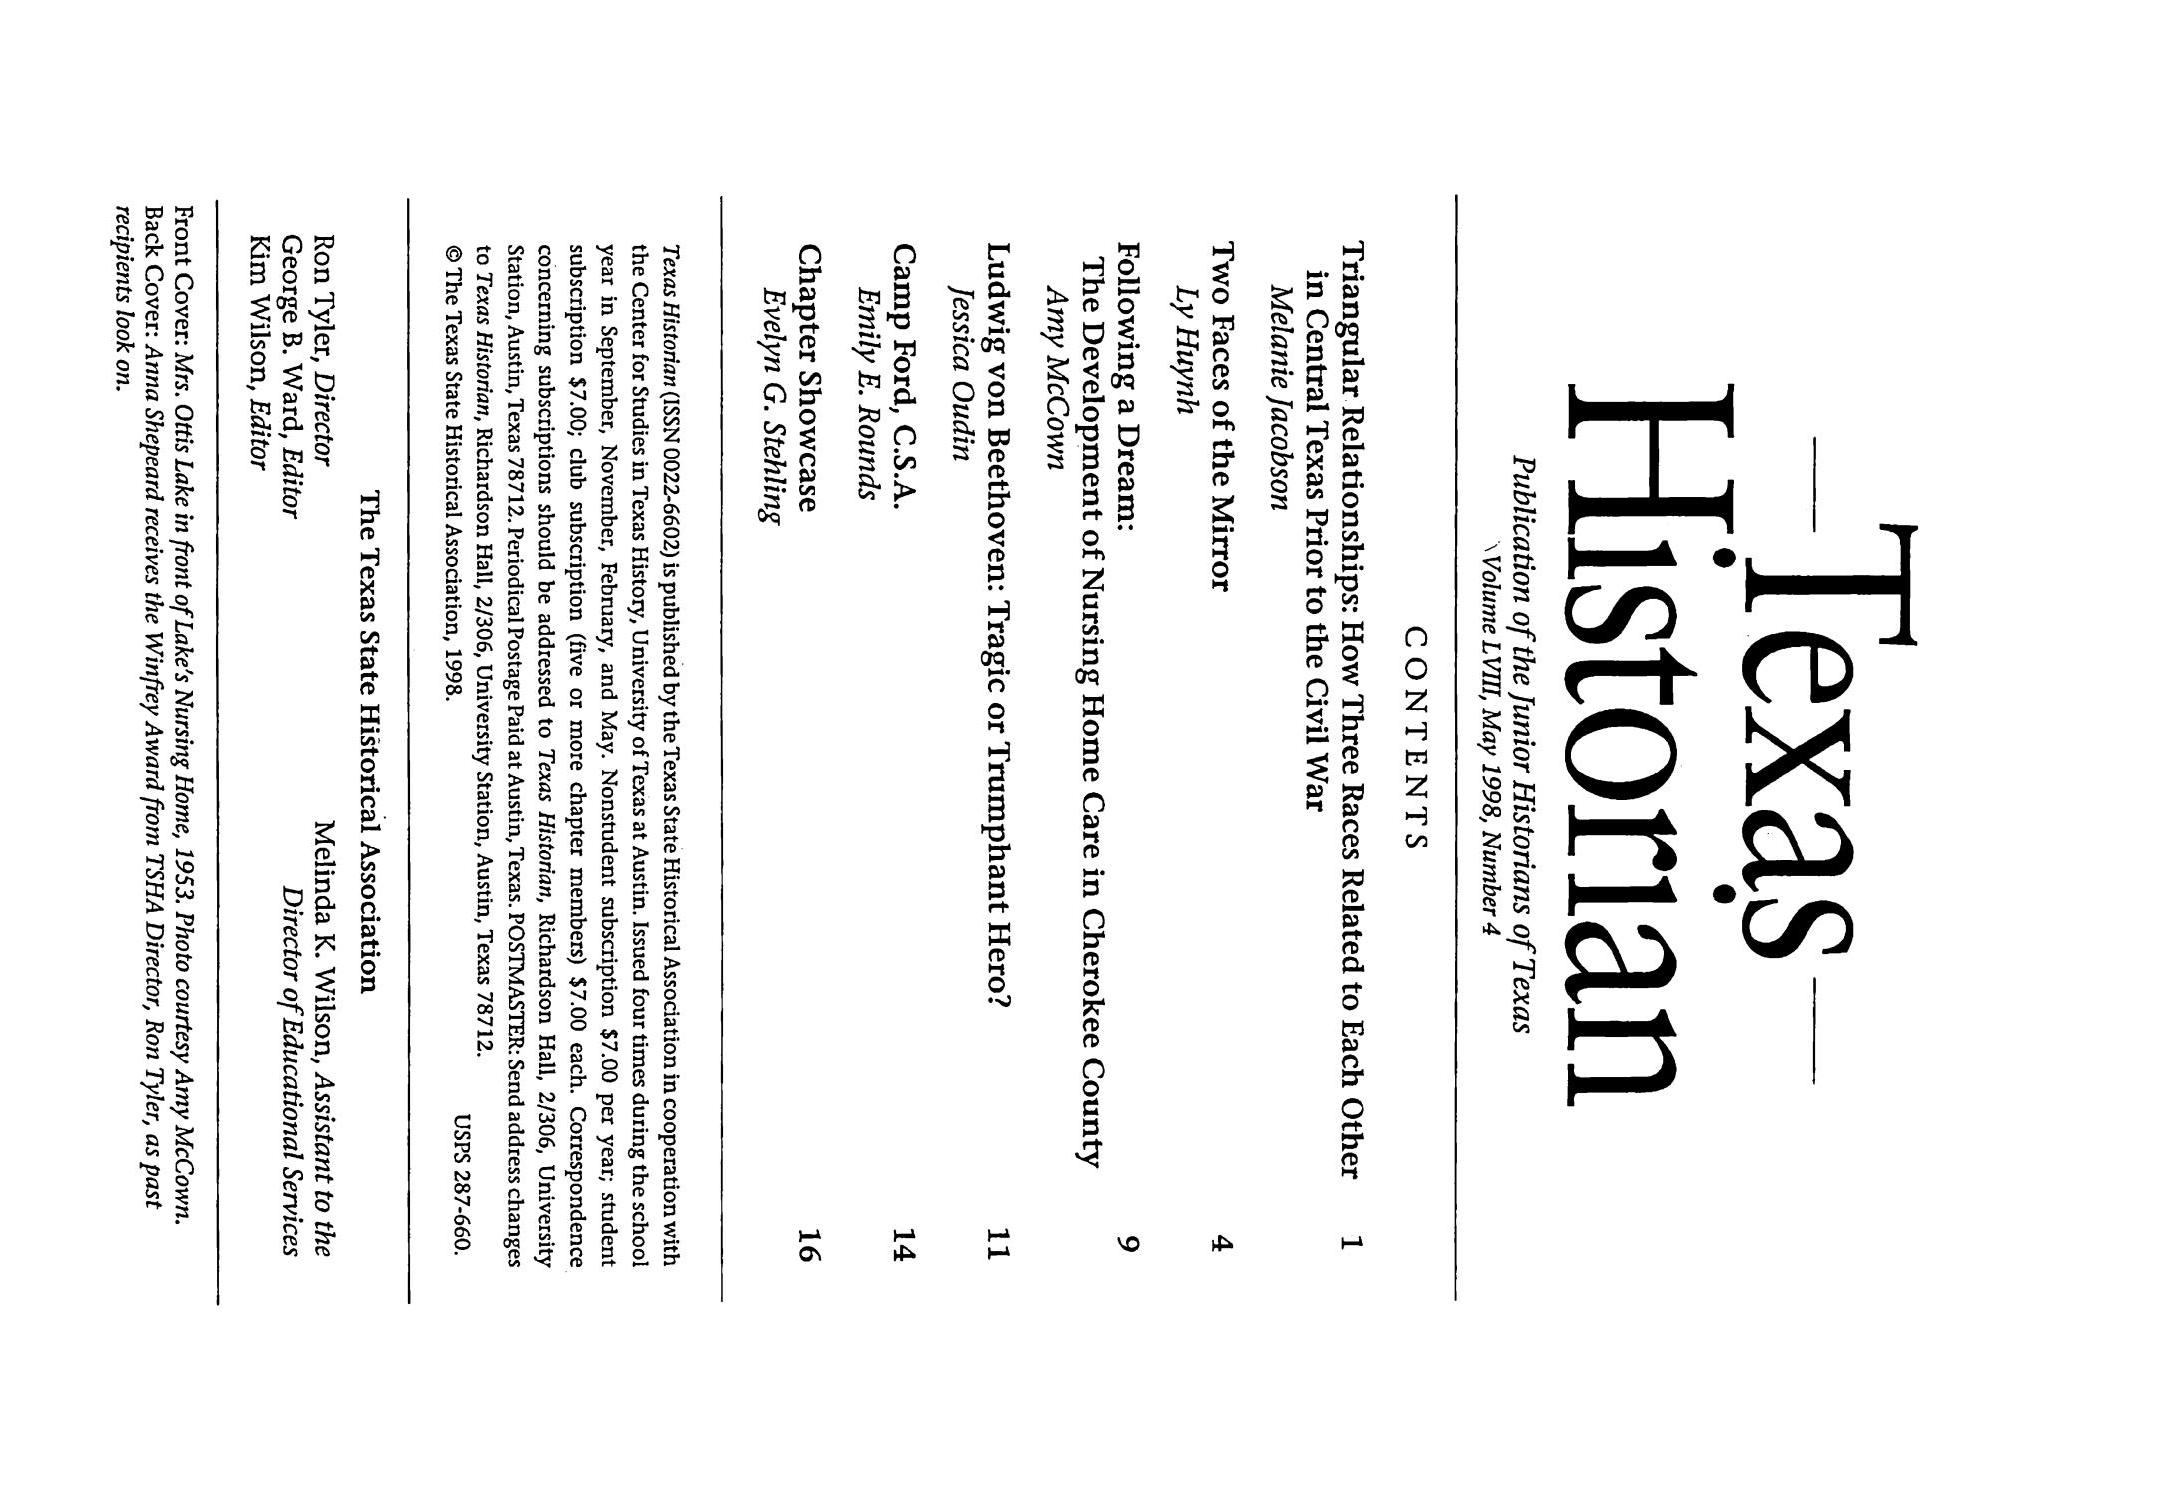 The Texas Historian, Volume 58, Number 4, May 1998
                                                
                                                    Front Inside
                                                